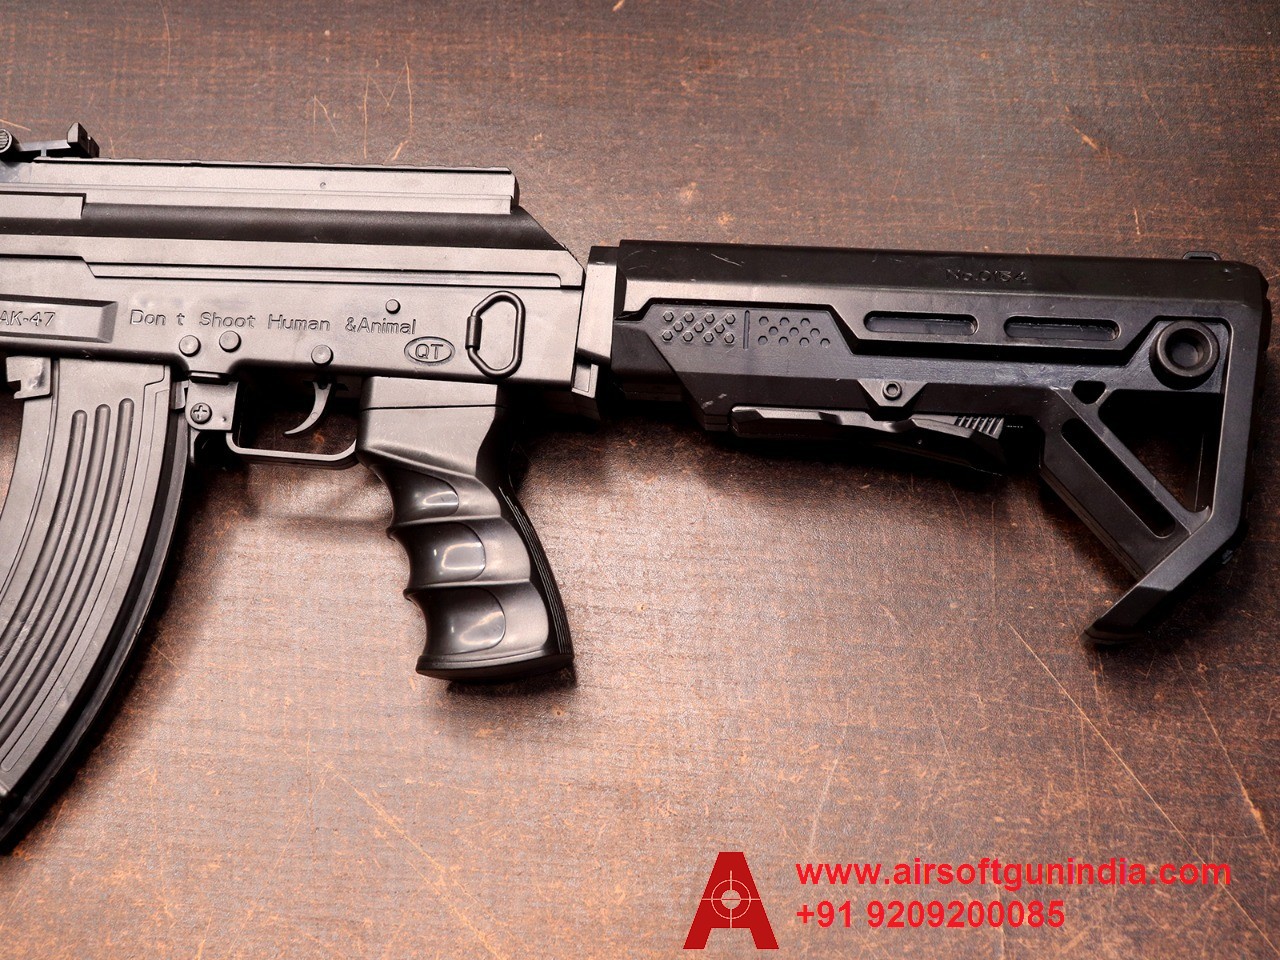 AK-203 Assault Airsoft Rifle With A Fake Knife by Airsoft Gun India.